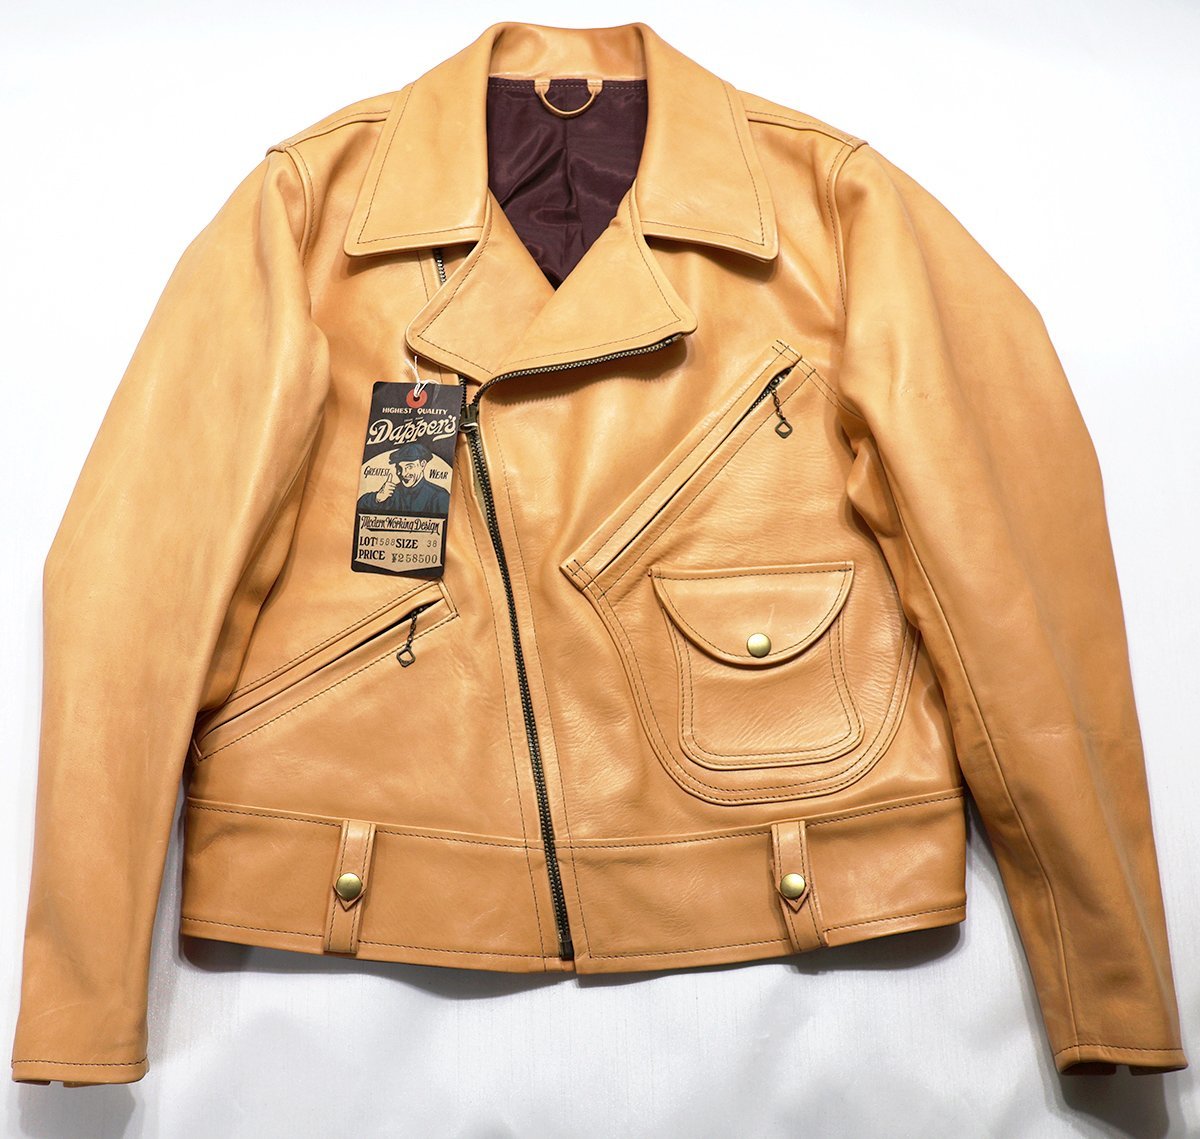 Dapper's (ダッパーズ) Lot 1588 50's Mortorcycle Leather Sports Jacket / トロ―ジャン ライダースジャケット 未使用品 Natural size38_画像1